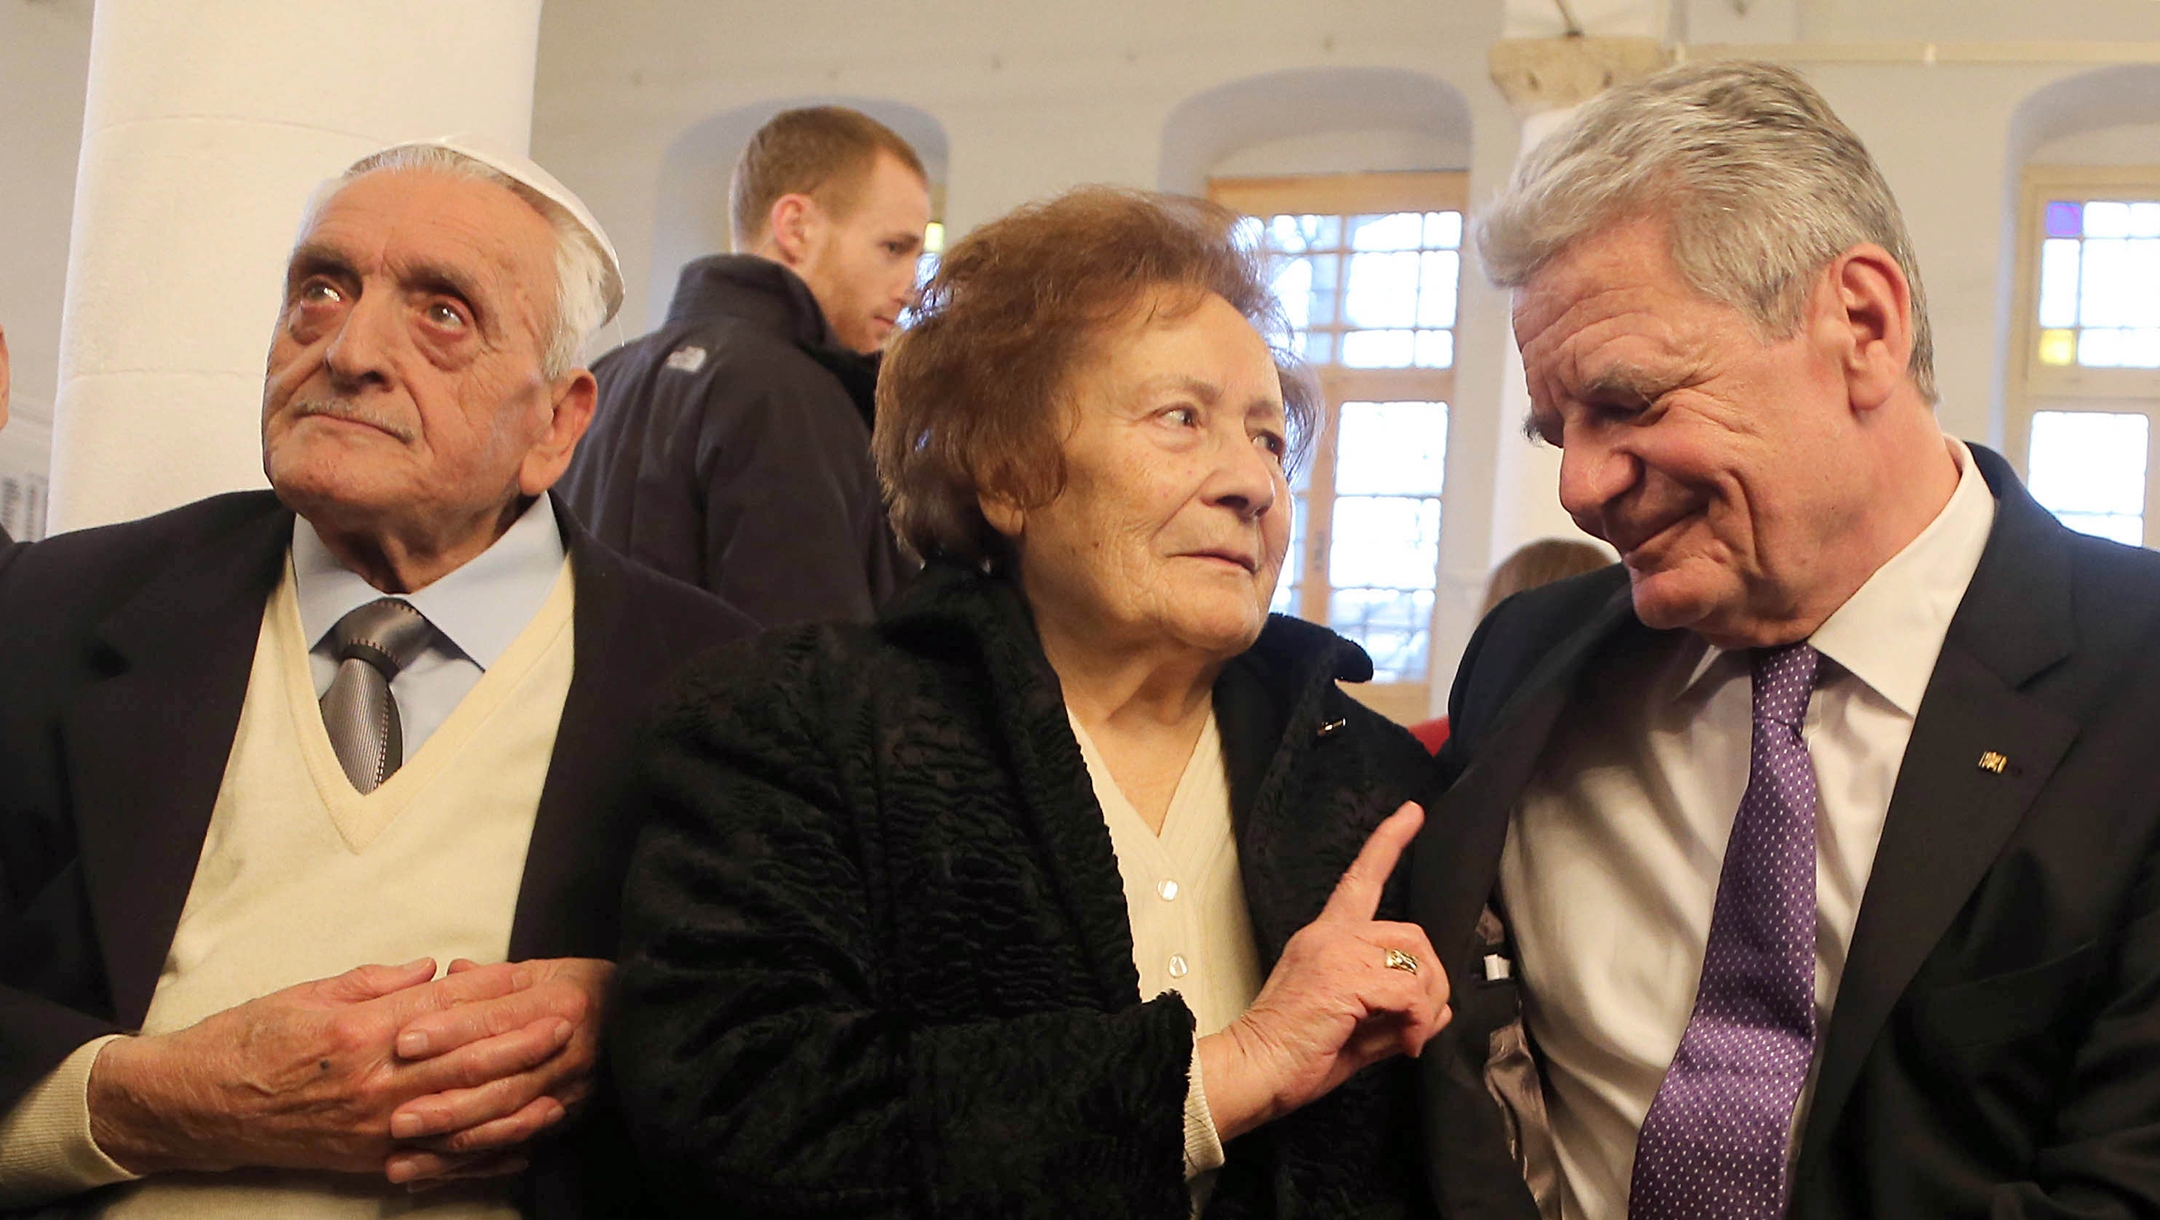 Esther Cohen sits near her husband Samuel, left, and German President Joachim Gauck in Ioannina, Greece on 07 March 2014. (Wolfgang Kumm/picture alliance via Getty Images)